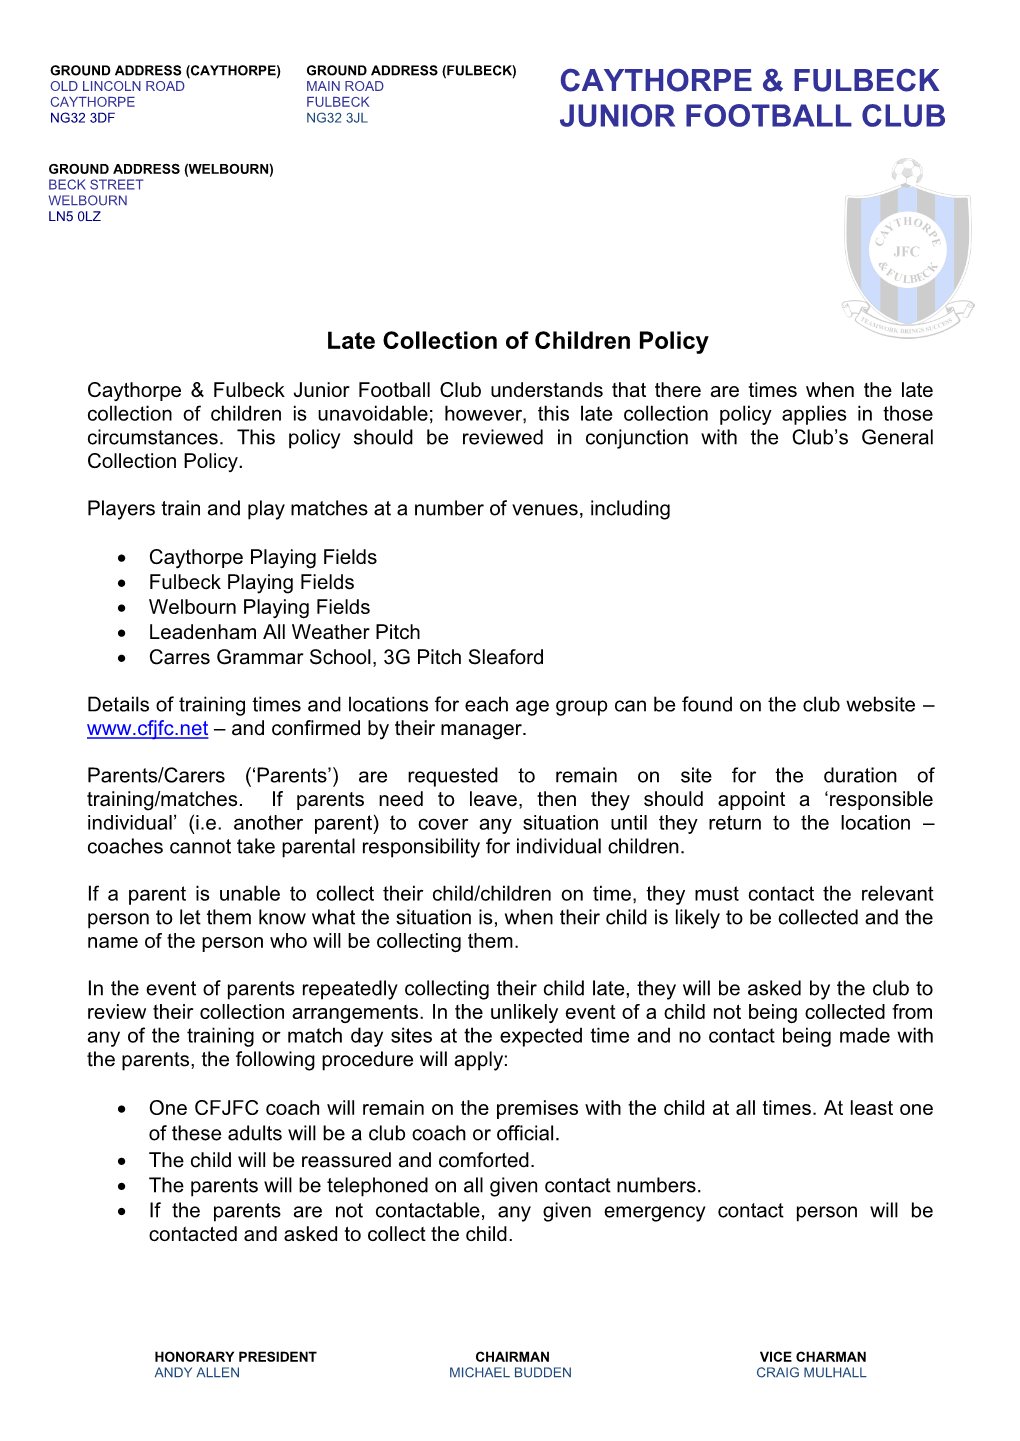 Late Collection Policy 2019